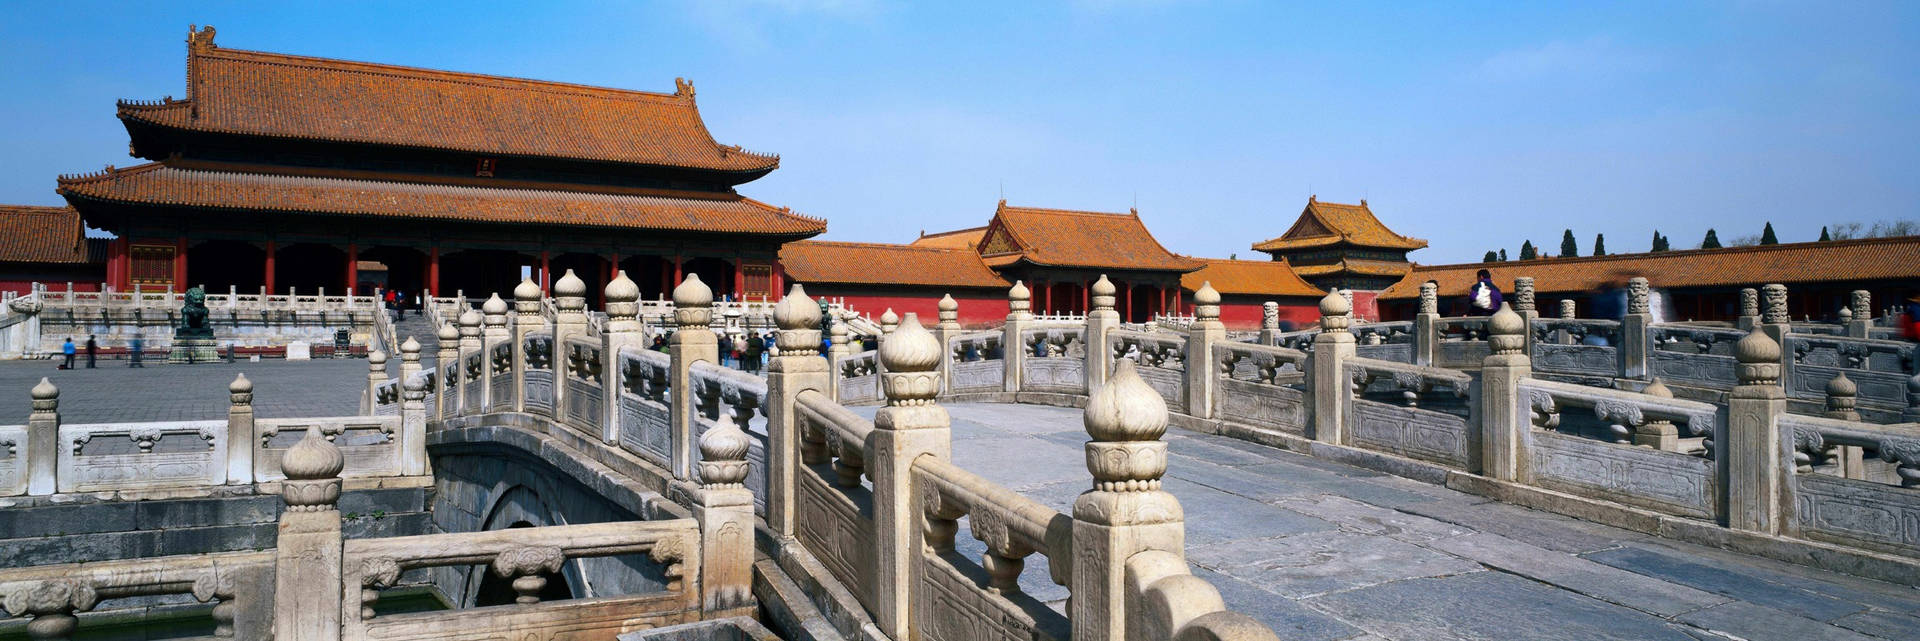 Palace Of Heavenly Purity Forbidden City Wallpaper